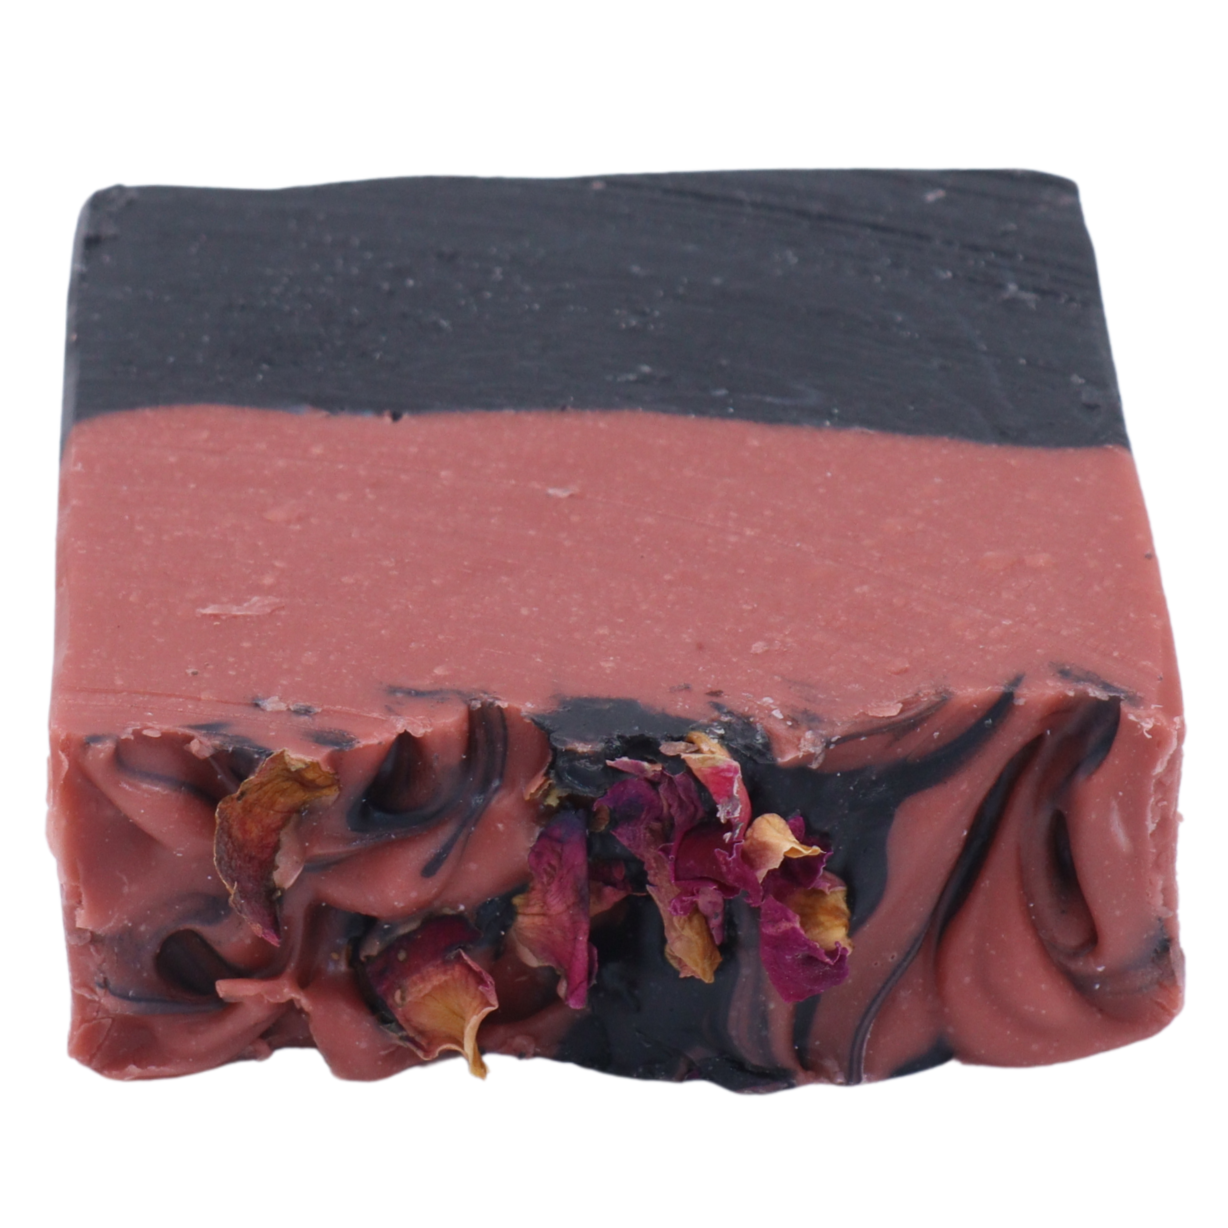 Rose Clay w/ Activated Charcoal Soap